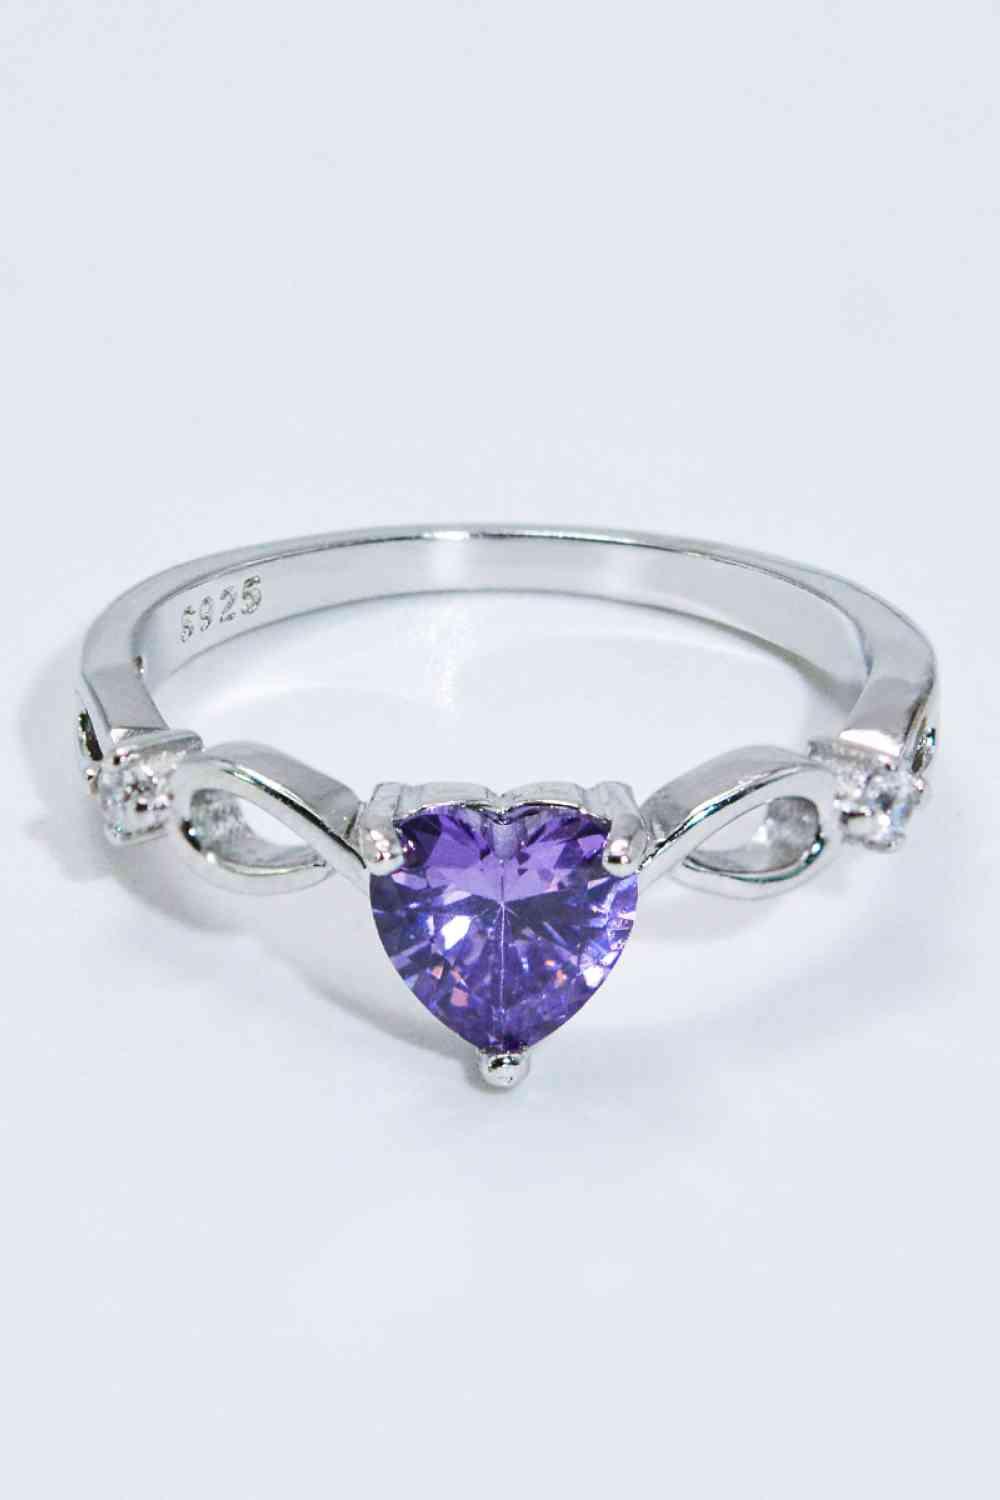 Crystal Heart 925 Sterling Silver Ring - God's Girl Gifts And Apparel